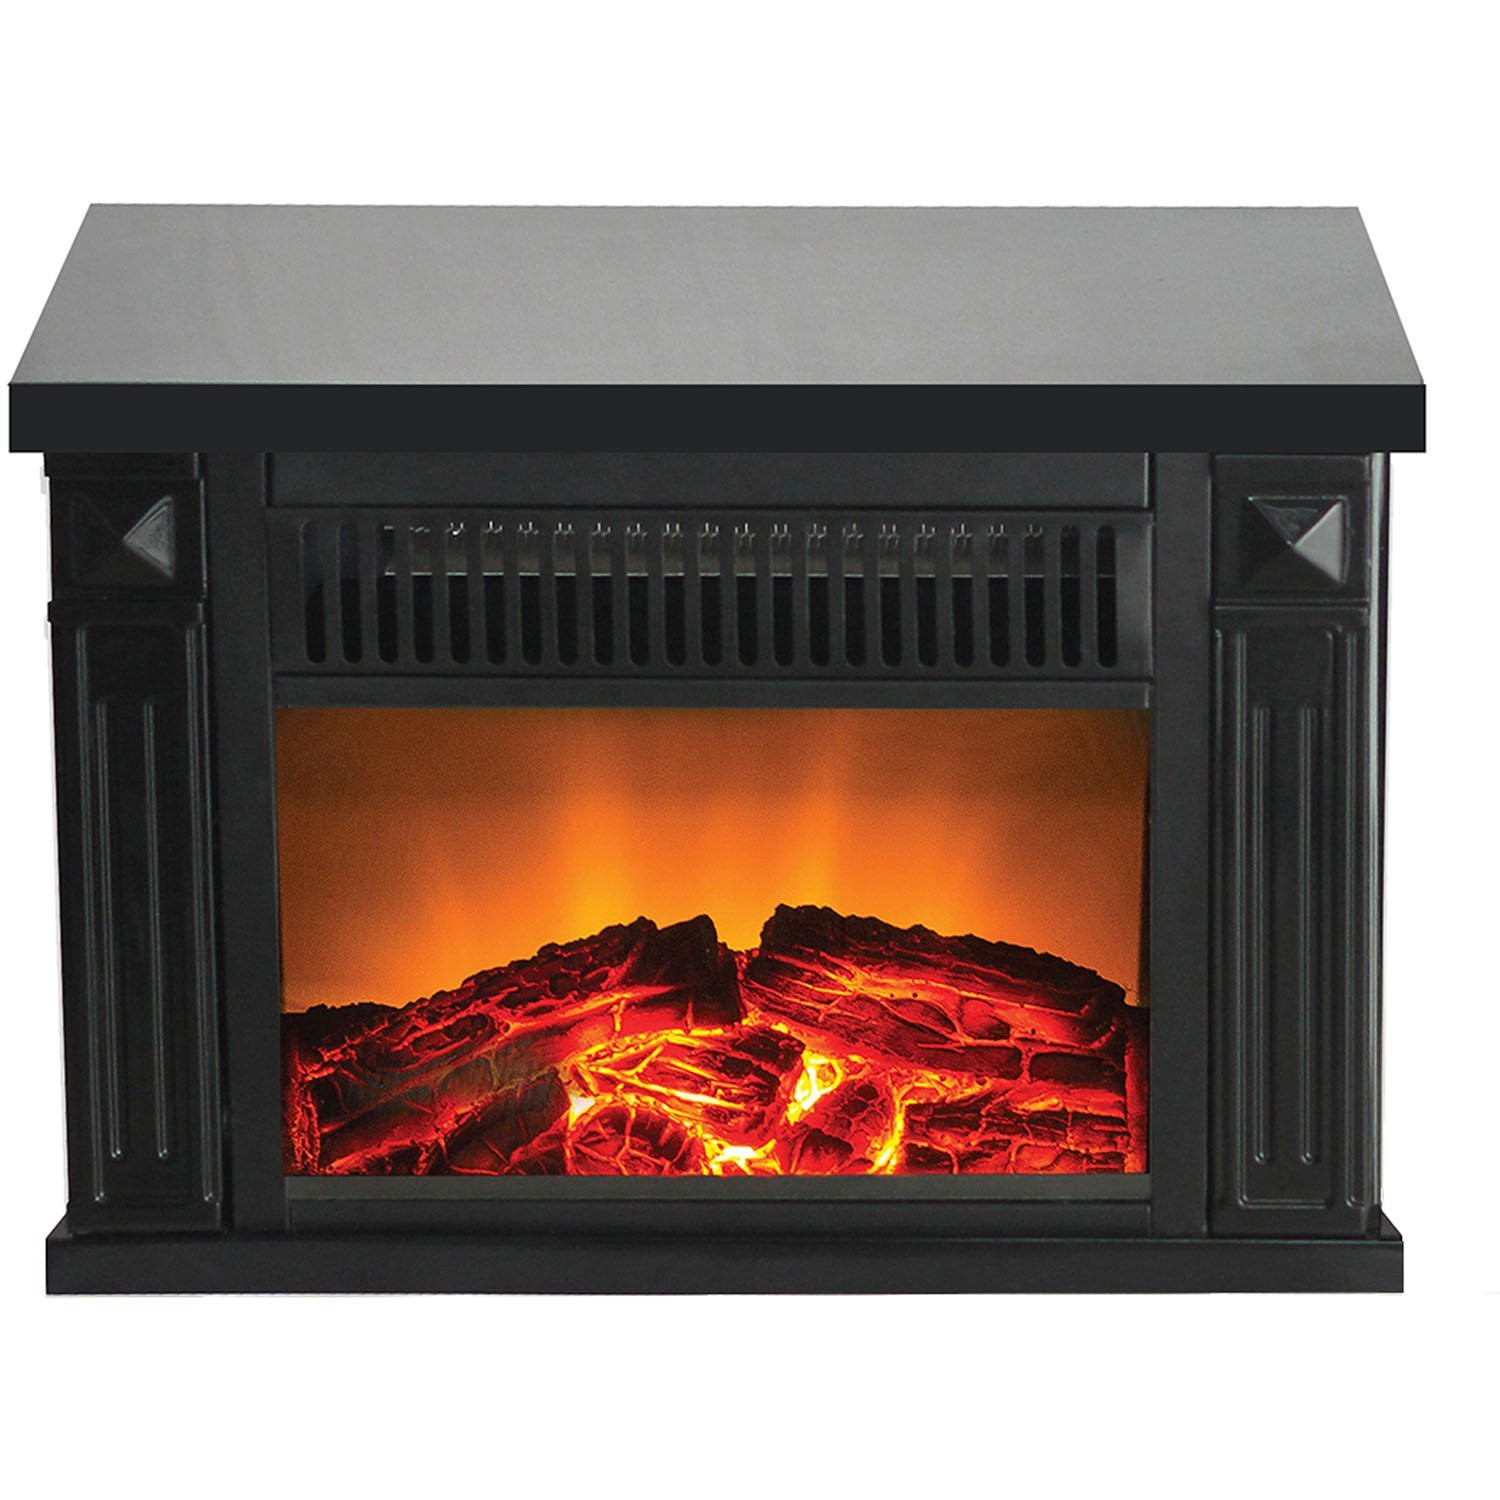 Table Top Electric Fireplace
 Freestanding Fireplace Reviews Best Freestanding